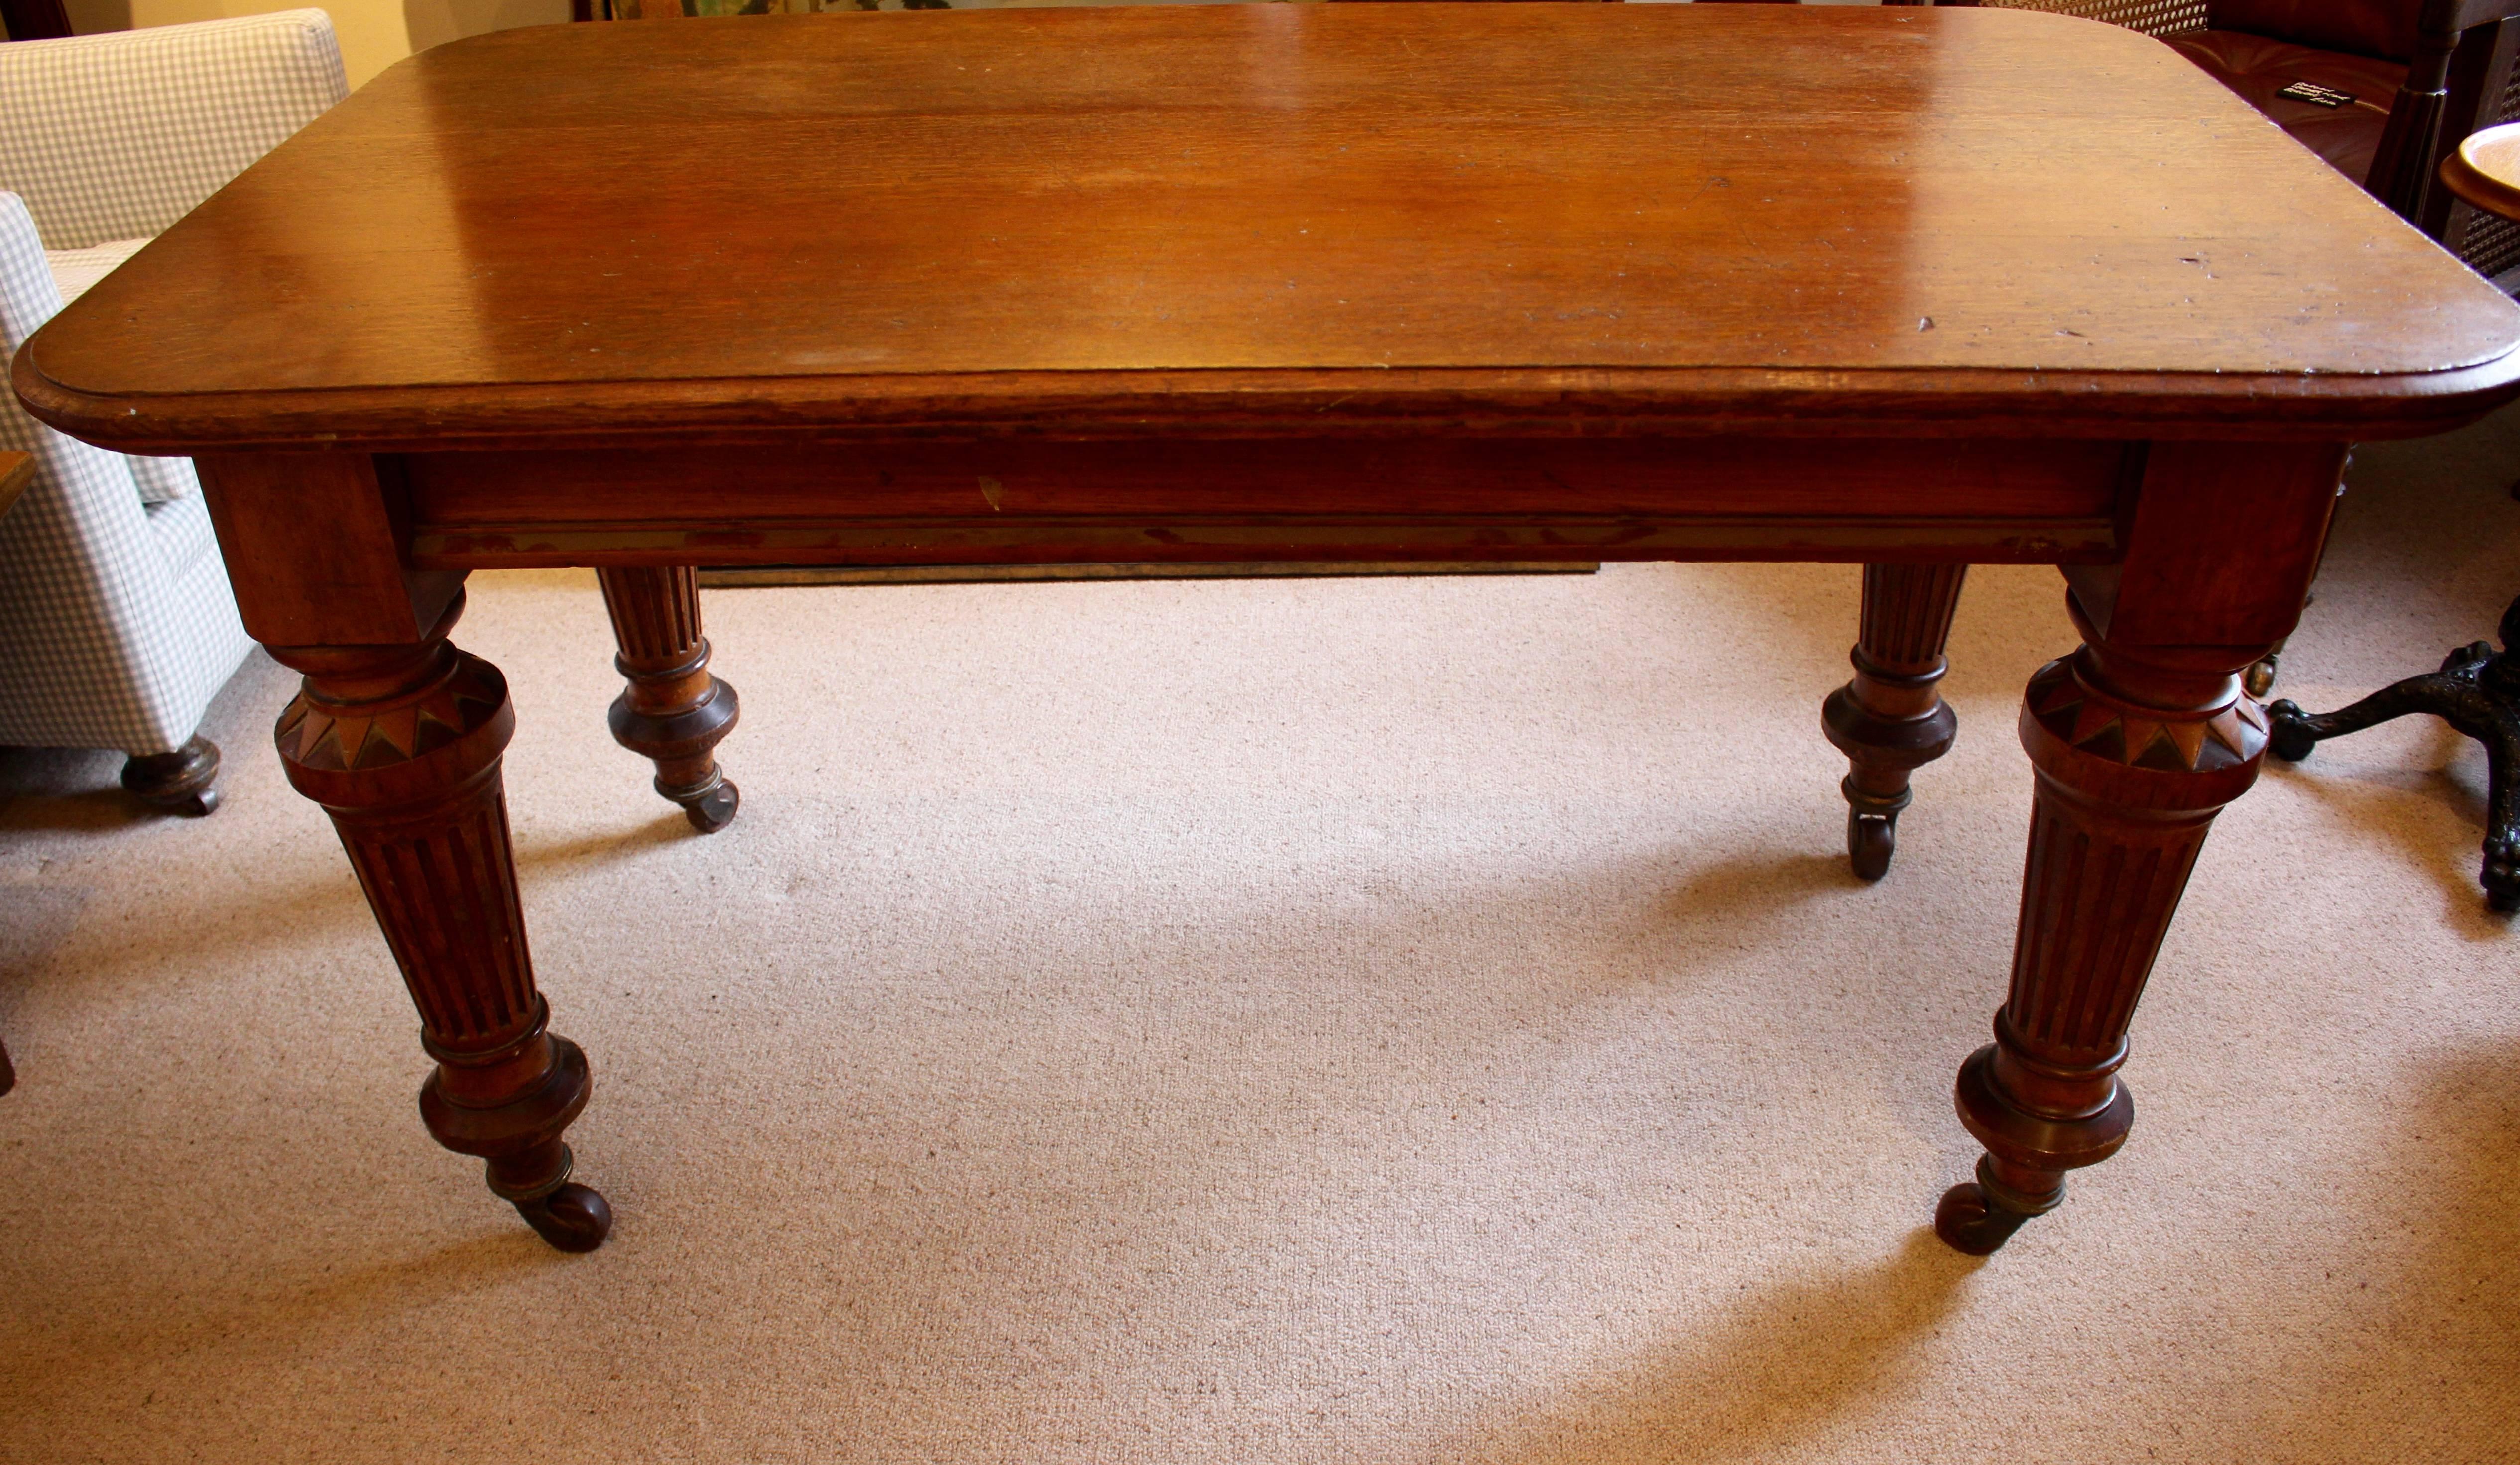 A handsome Victorian Oak Library table. Having lipped edge tabletop with rounded corners. The most delightful legs, being topped with a circular cambered top and attractive dogs tooth carving. The main part of the leg being tapered and fluted, with